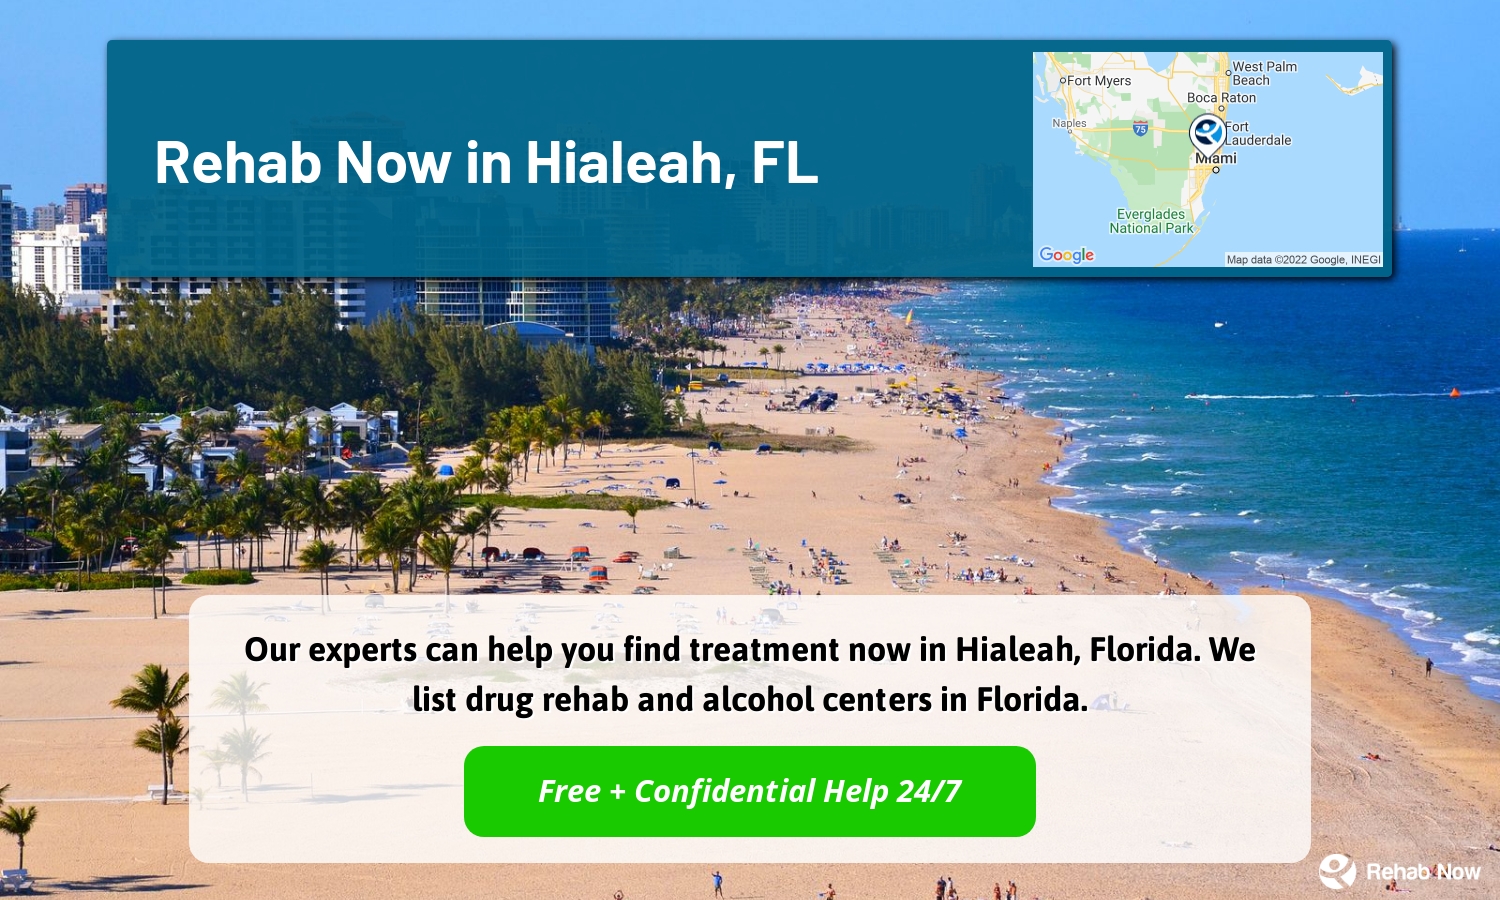 Our experts can help you find treatment now in Hialeah, Florida. We list drug rehab and alcohol centers in Florida.